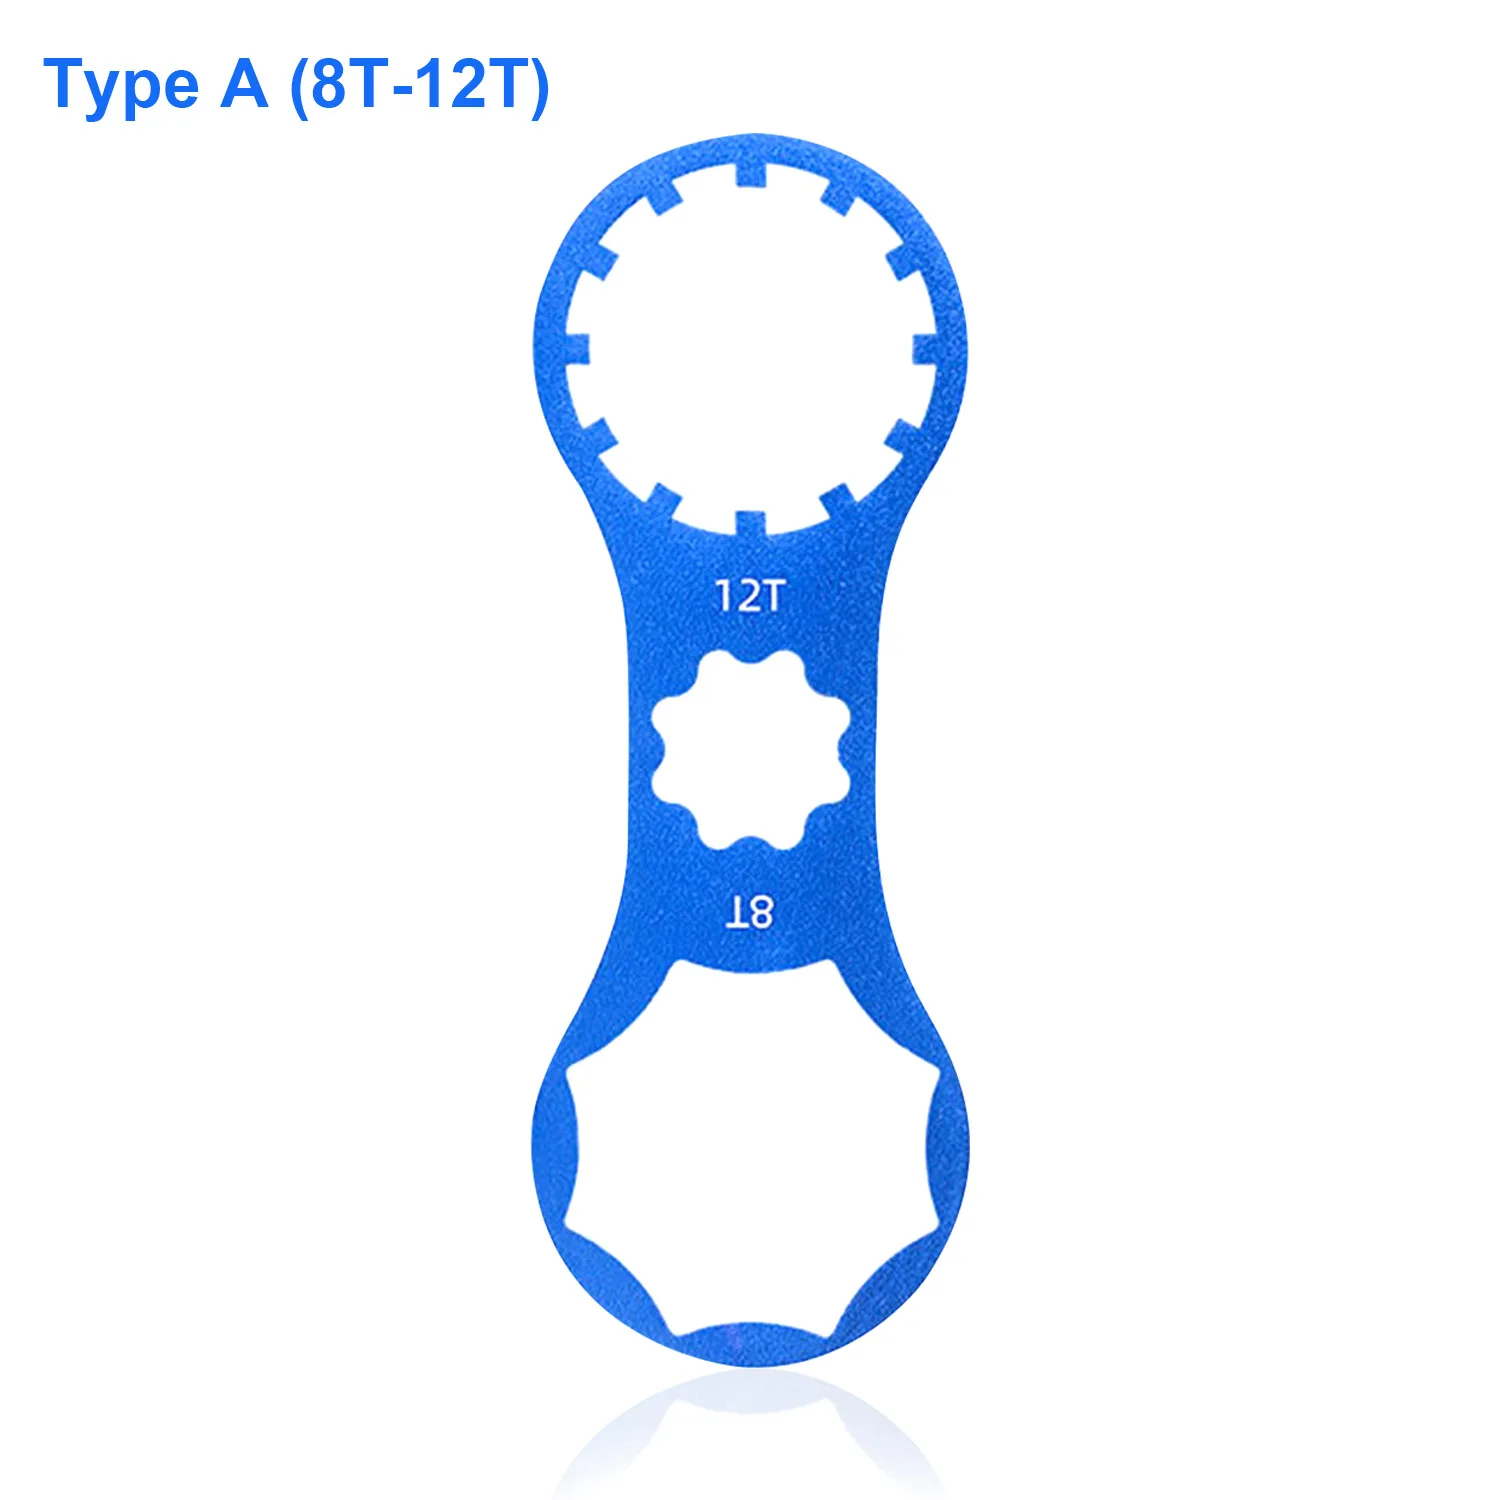 

Bike Front Fork Wrench Aluminum Alloy Bicycle Repairing Removal Spanner Intended for SUNTOUR XCM/XCR/XCT/RST, B, Red